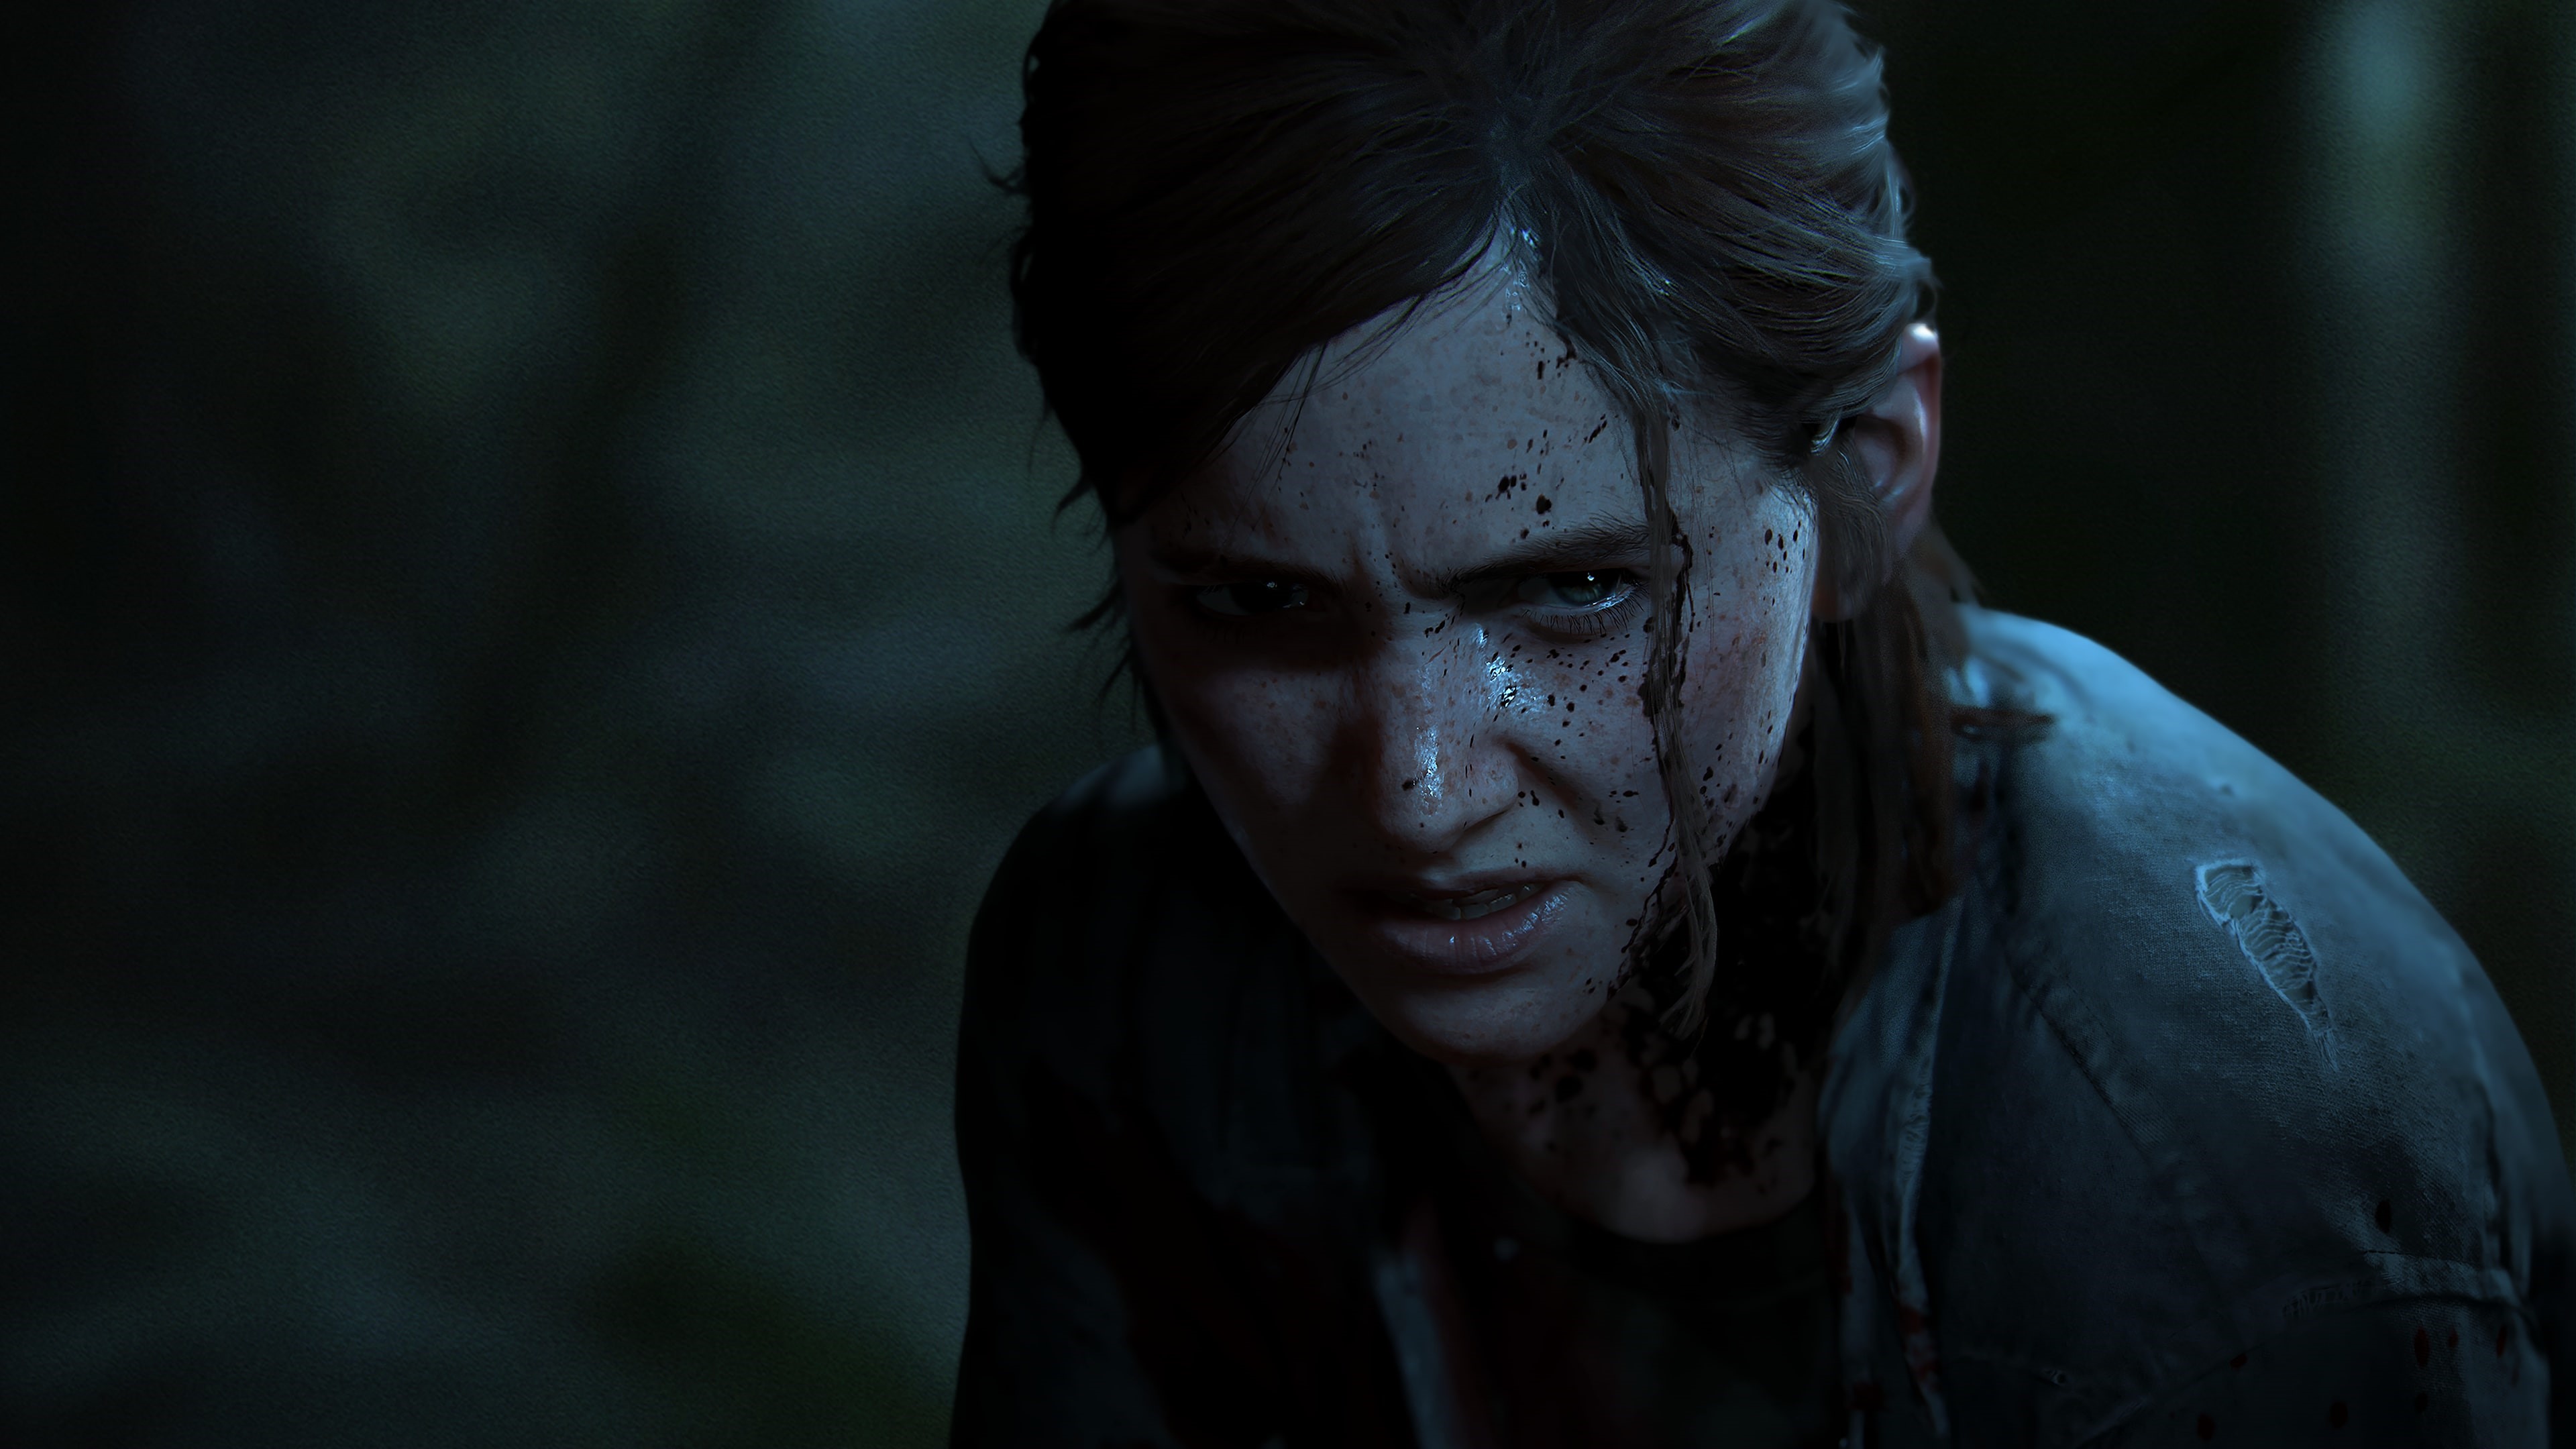 The Last of Us Part II is discounted on PlayStation Store